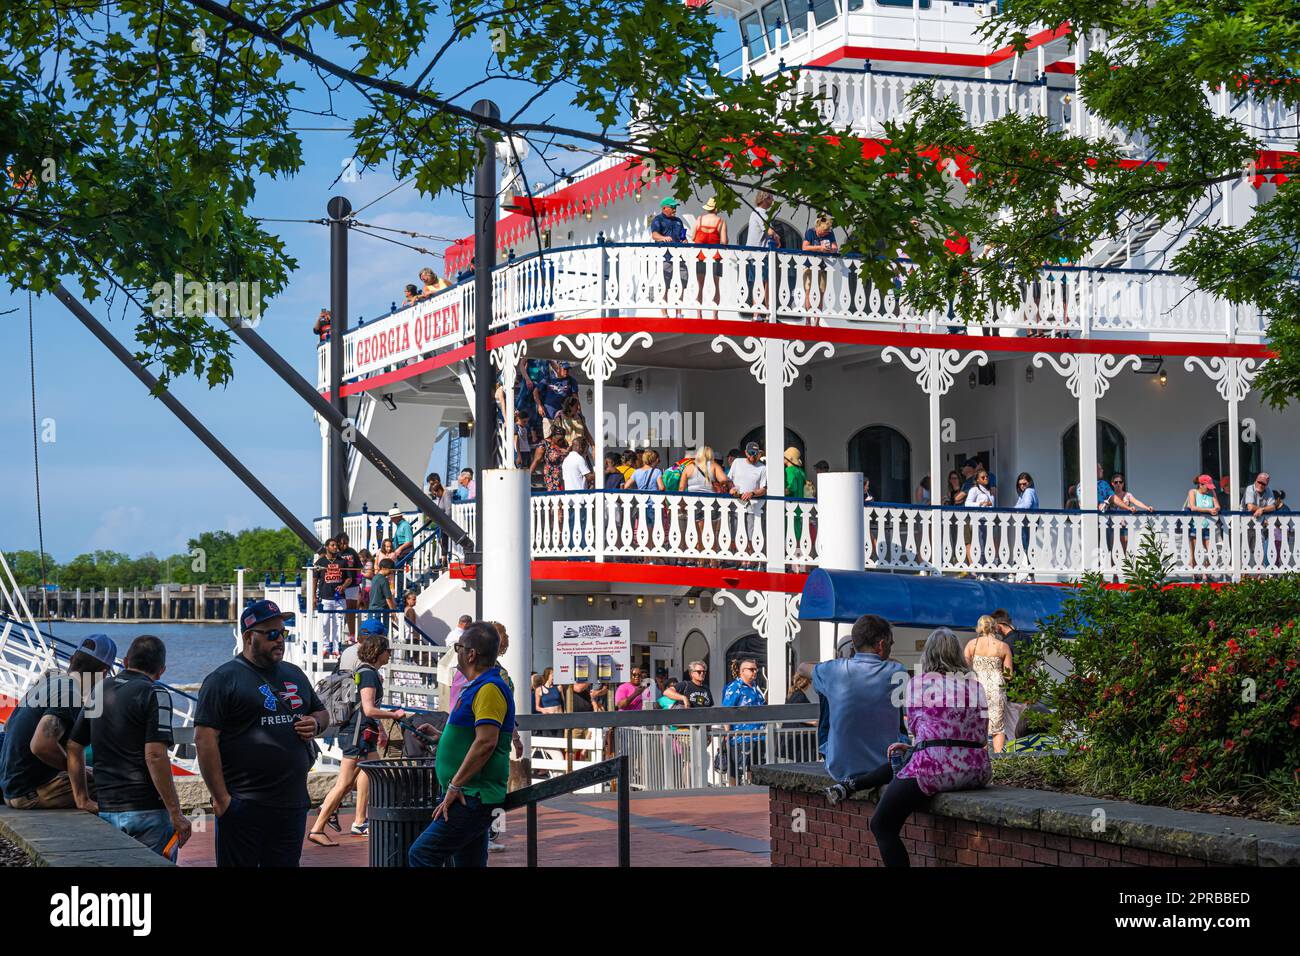 People boarding the Georgia Queen riverboat along River Street in Savannah, Georgia, for a dinner cruise on the Savannah River. (USA) Stock Photo